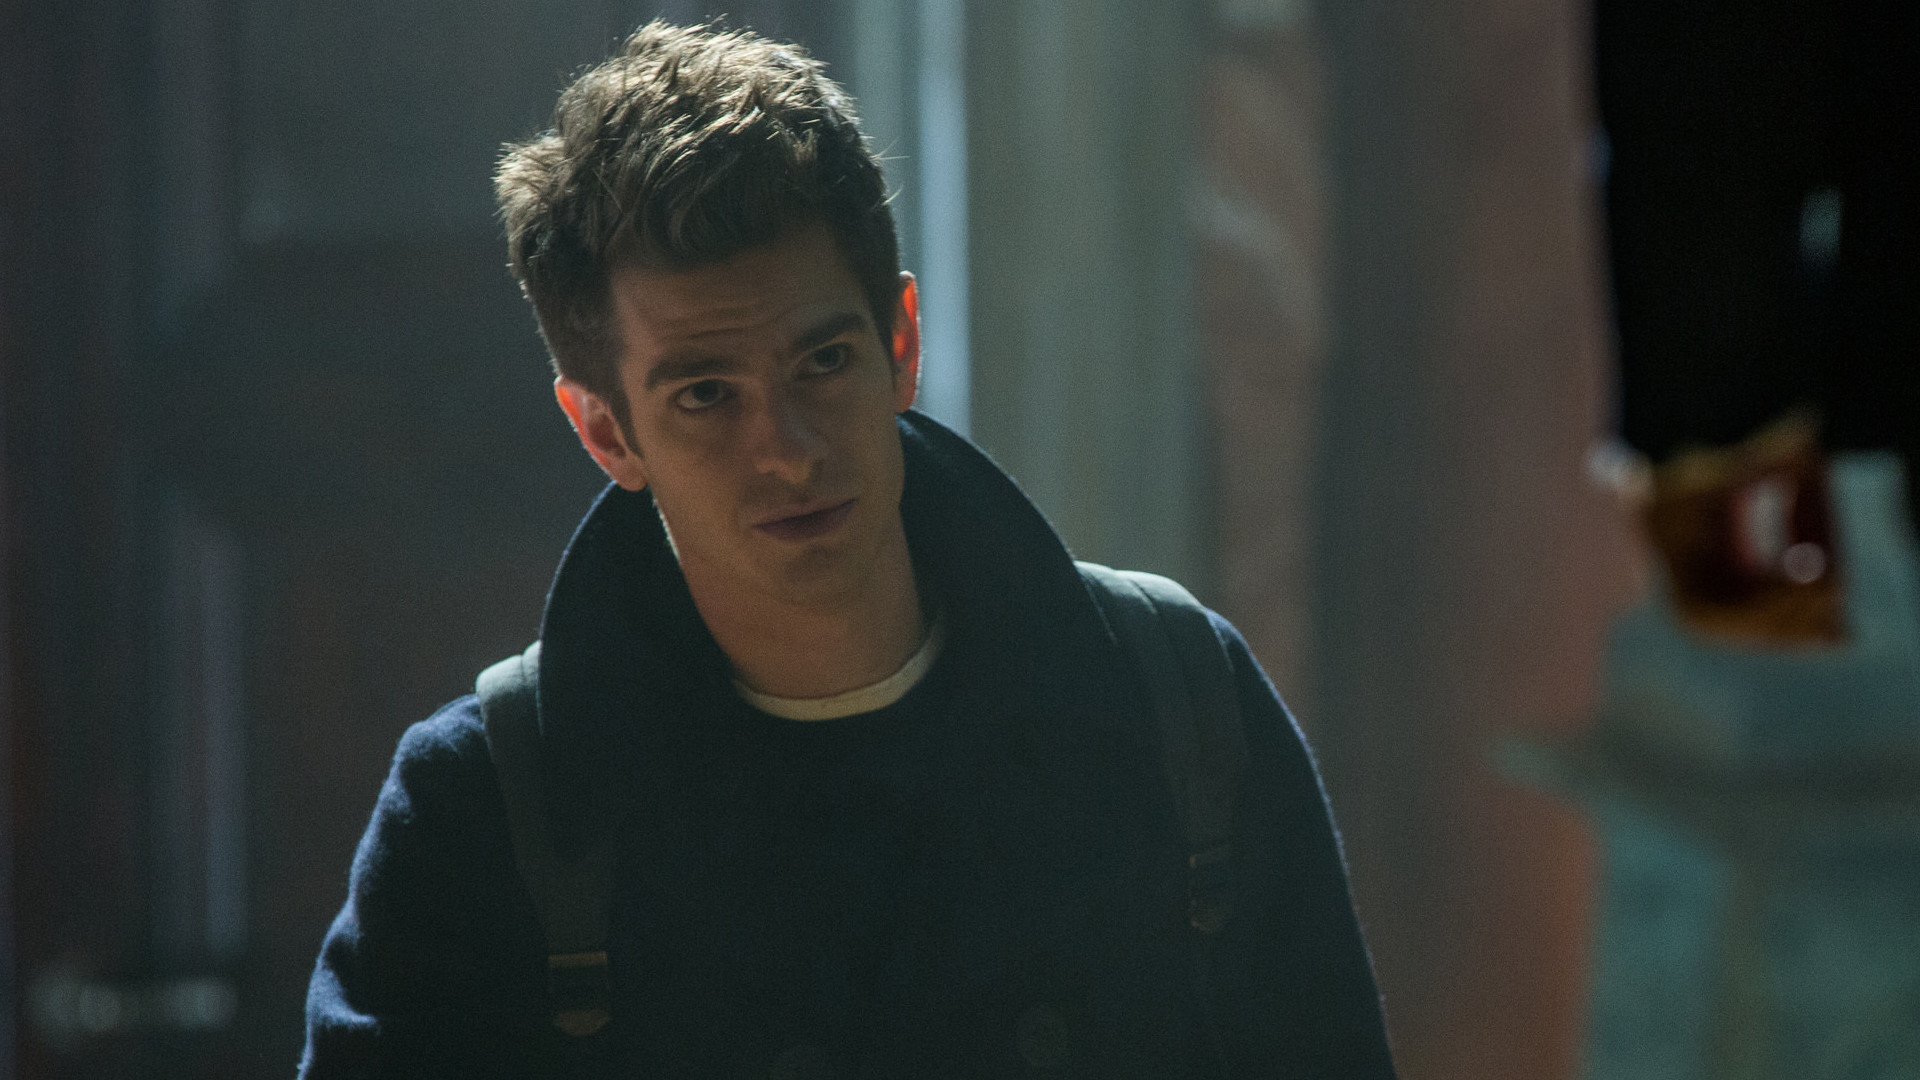 1920x1080 andrew garfield as peter parker in the amazing spider man 2 movie